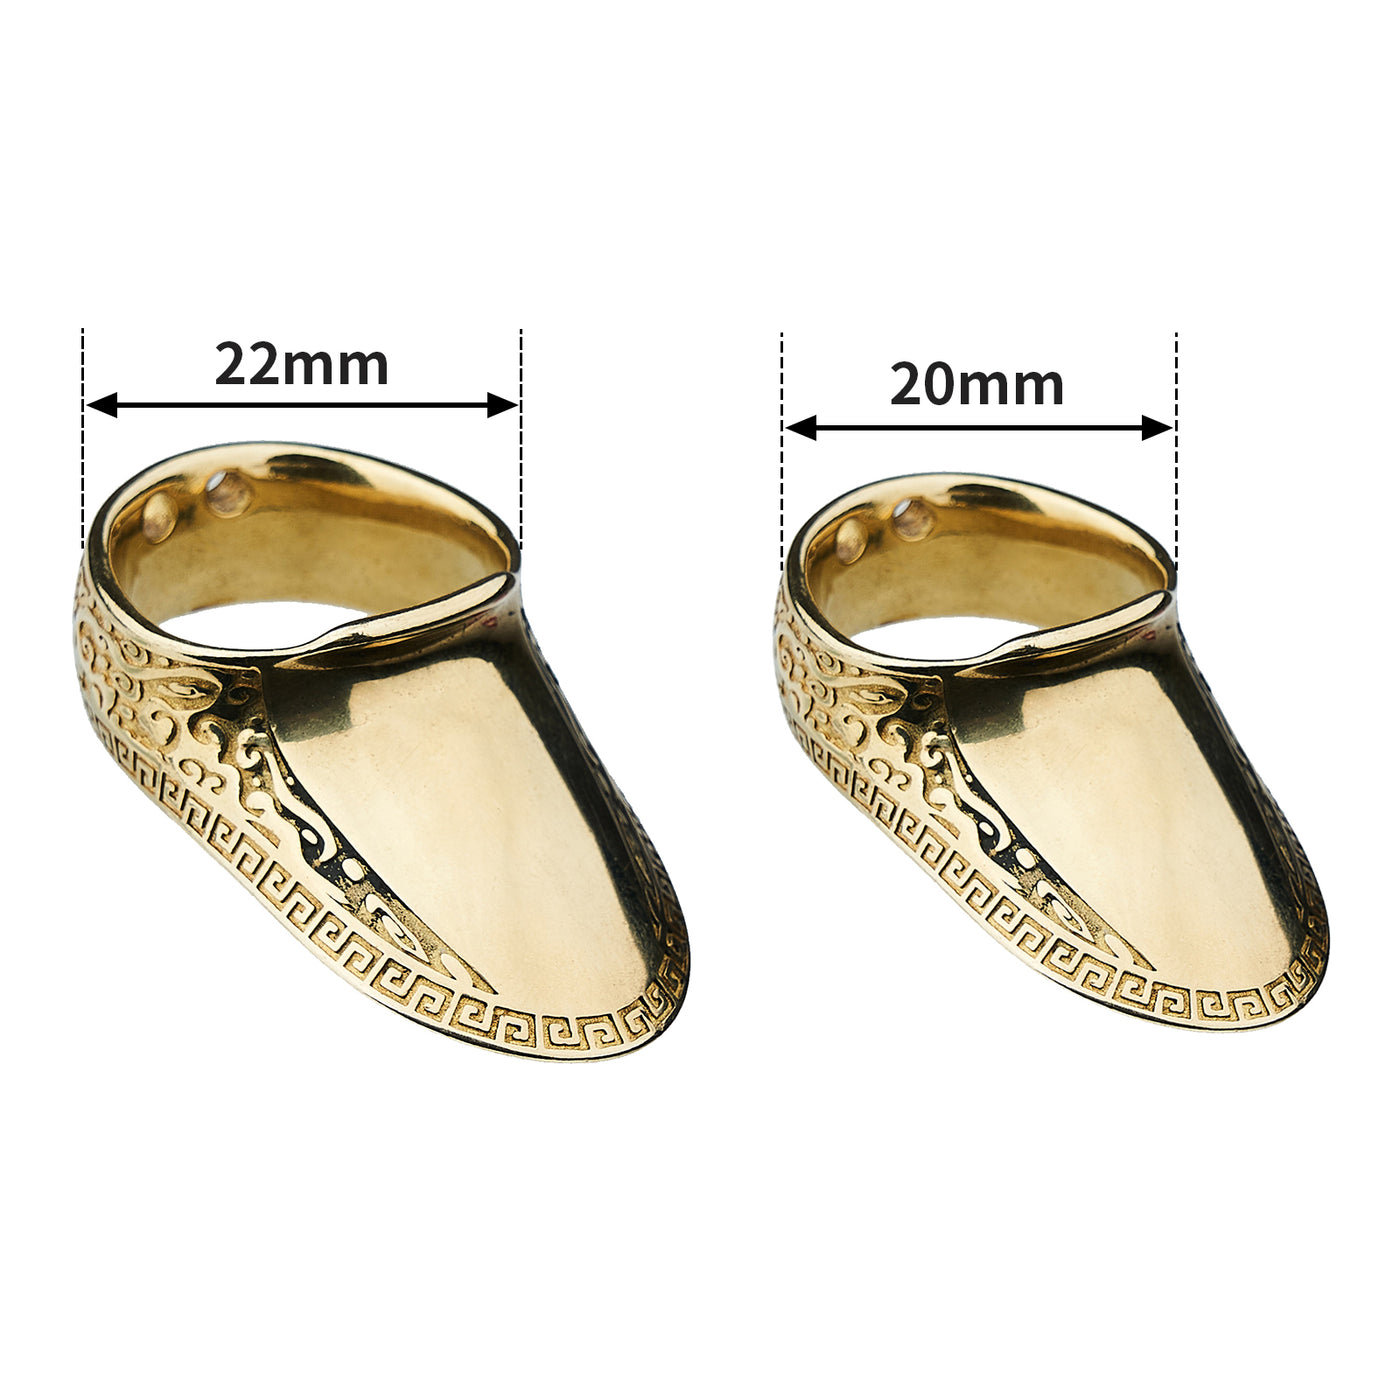 Brass Archery Thumb Ring For Traditional Mongolian Horse Bow Shooting